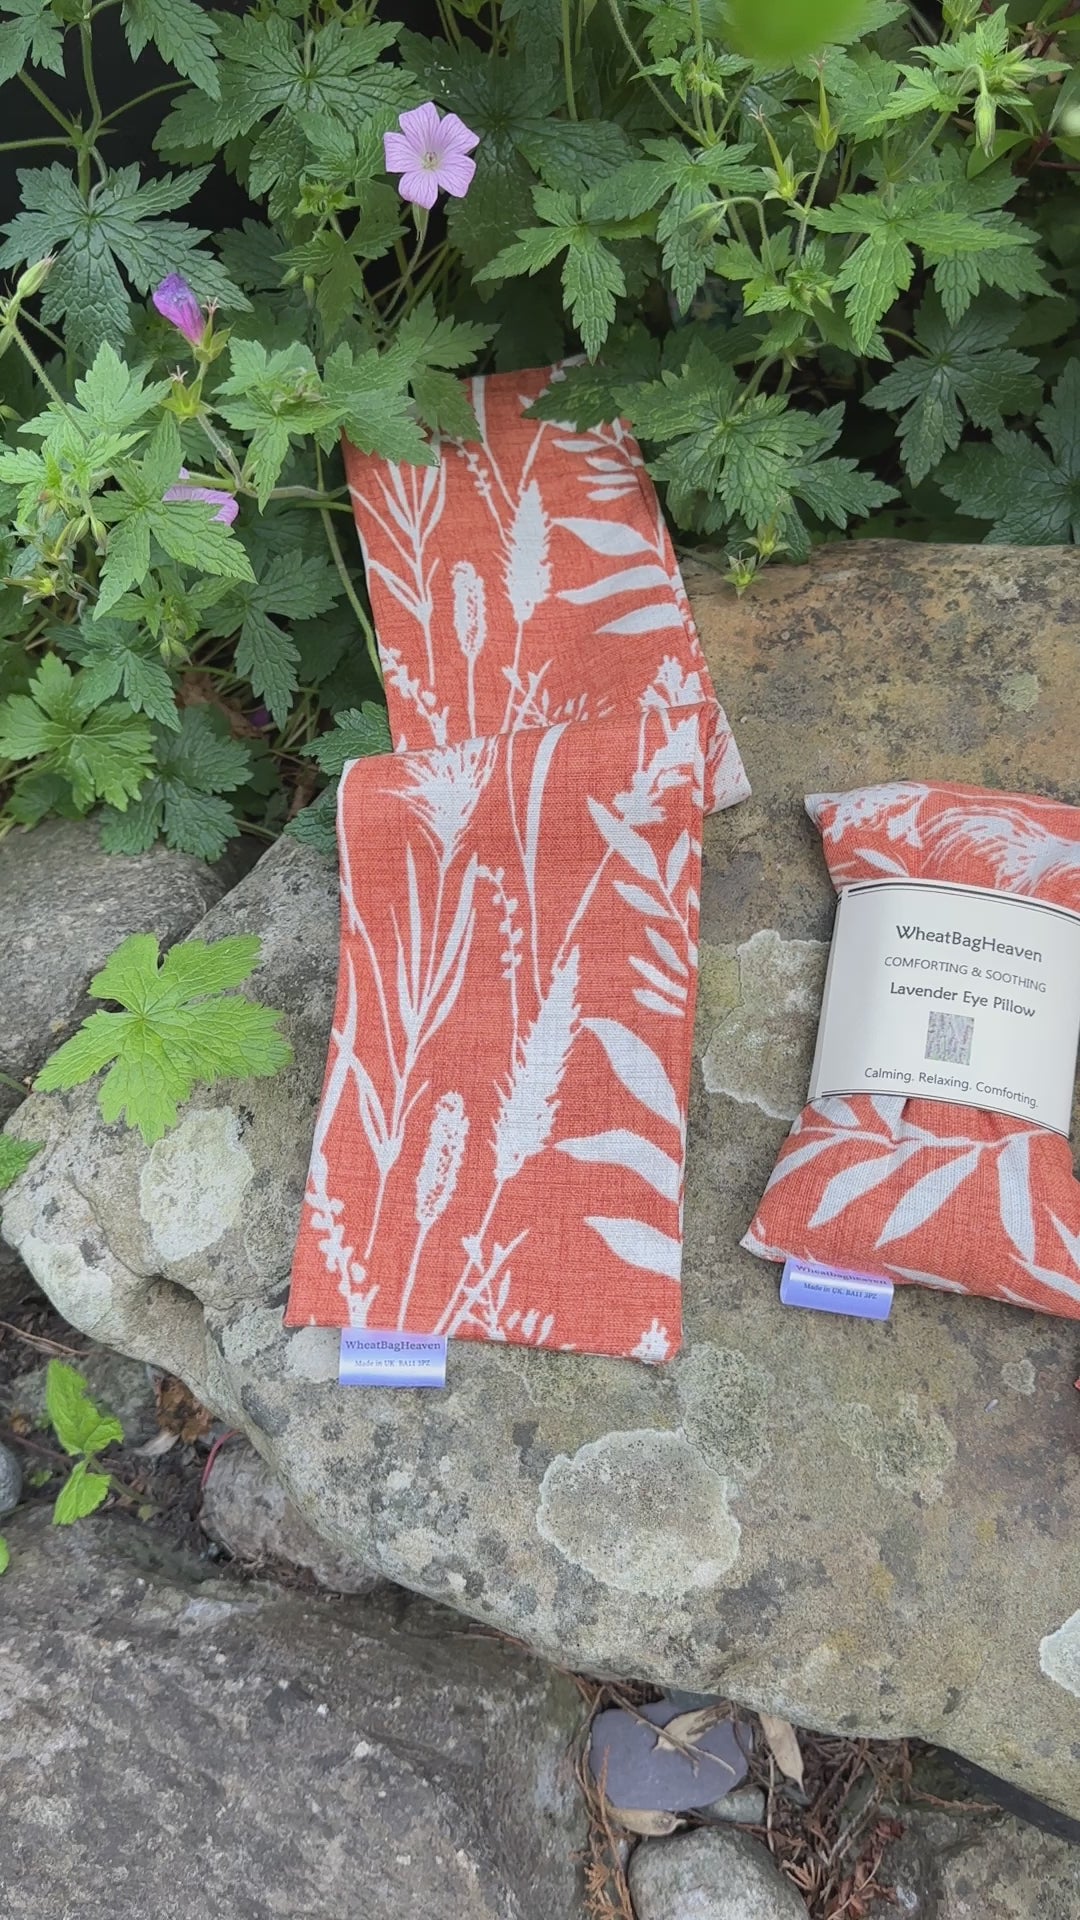 Short video of our orange, grass printed wheat bags and eye pillows with fabric close up from wheat bag heaven